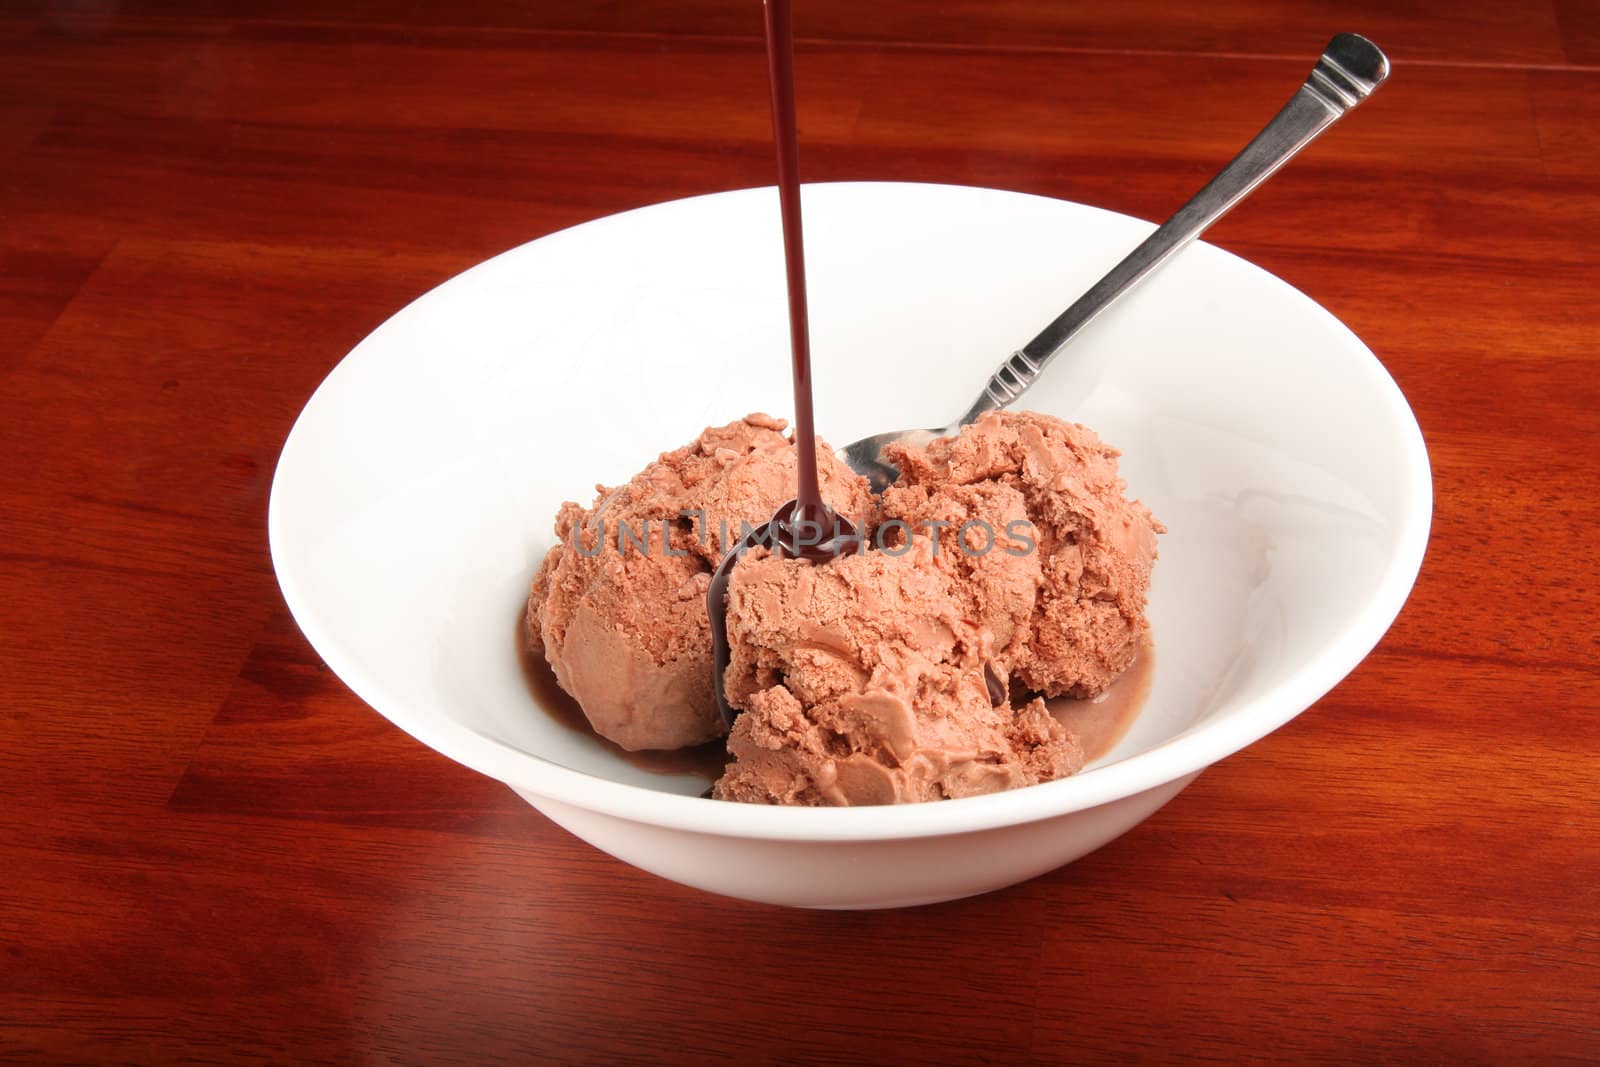 Delicious bowl of chocolate ice cream with chocolate sauce